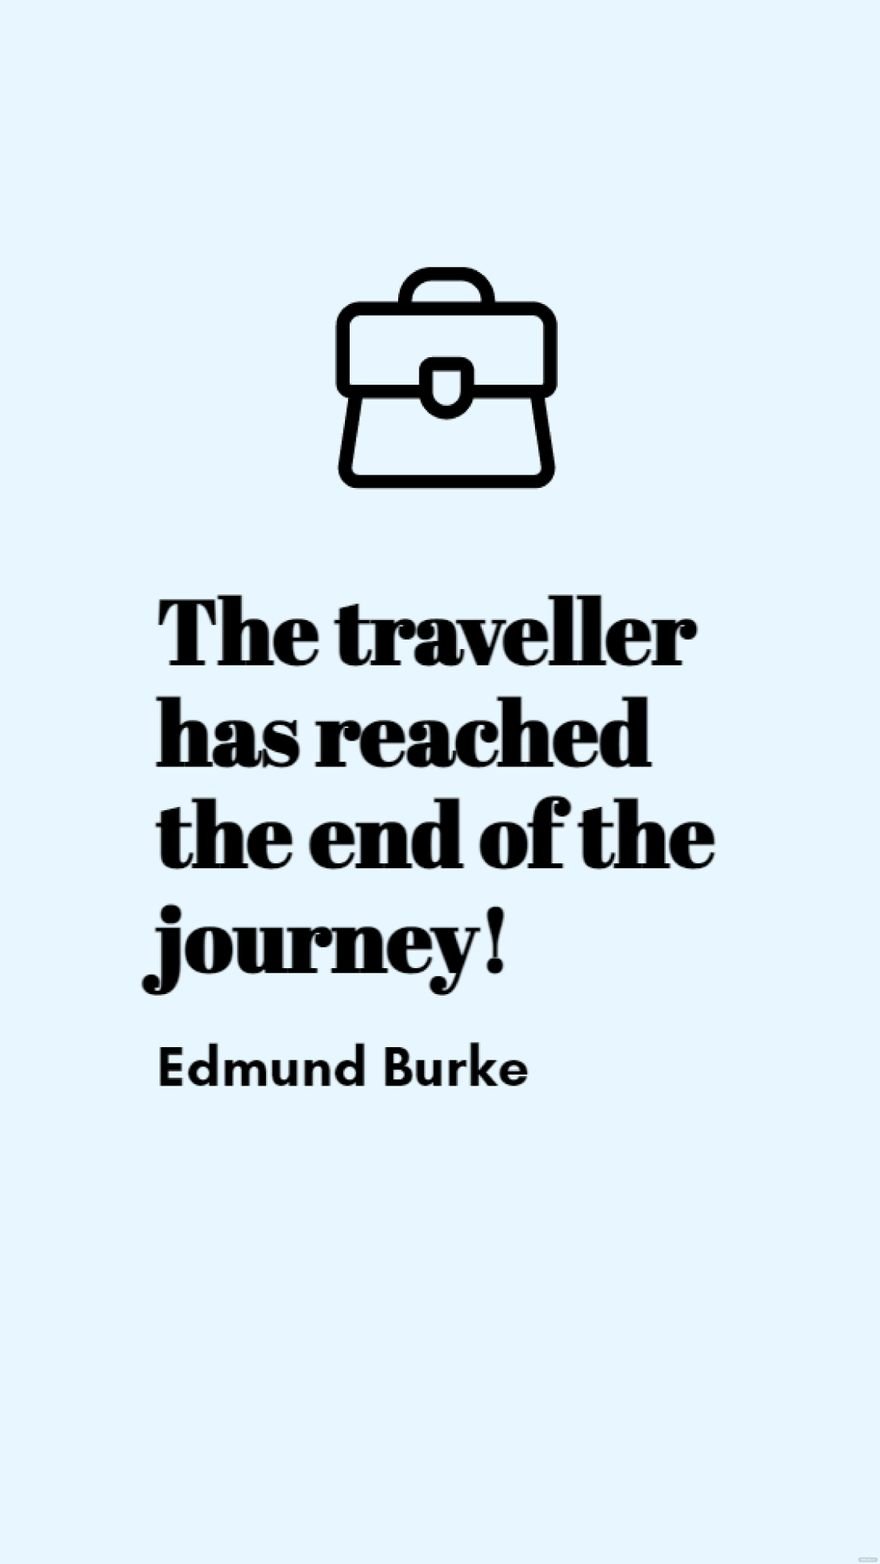 Free Edmund Burke - The traveller has reached the end of the journey! in JPG